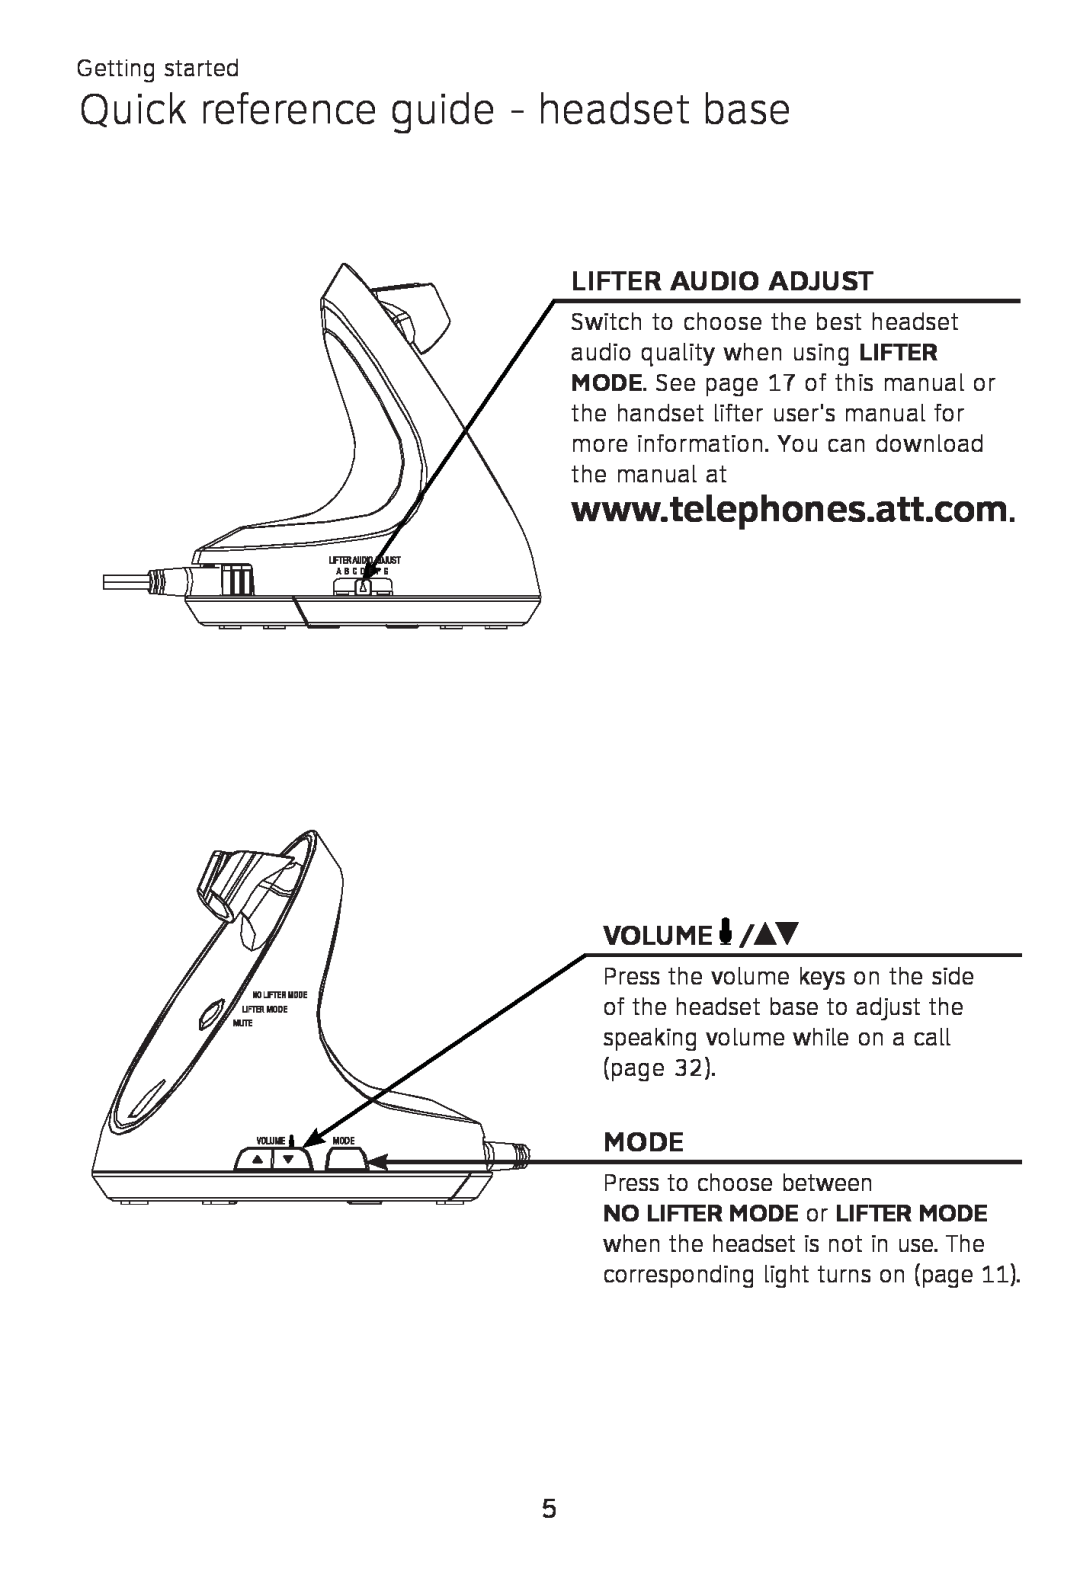 AT&T TL 7610 user manual Quick reference guide - headset base, Lifter Audio Adjust, Volume, Mode 